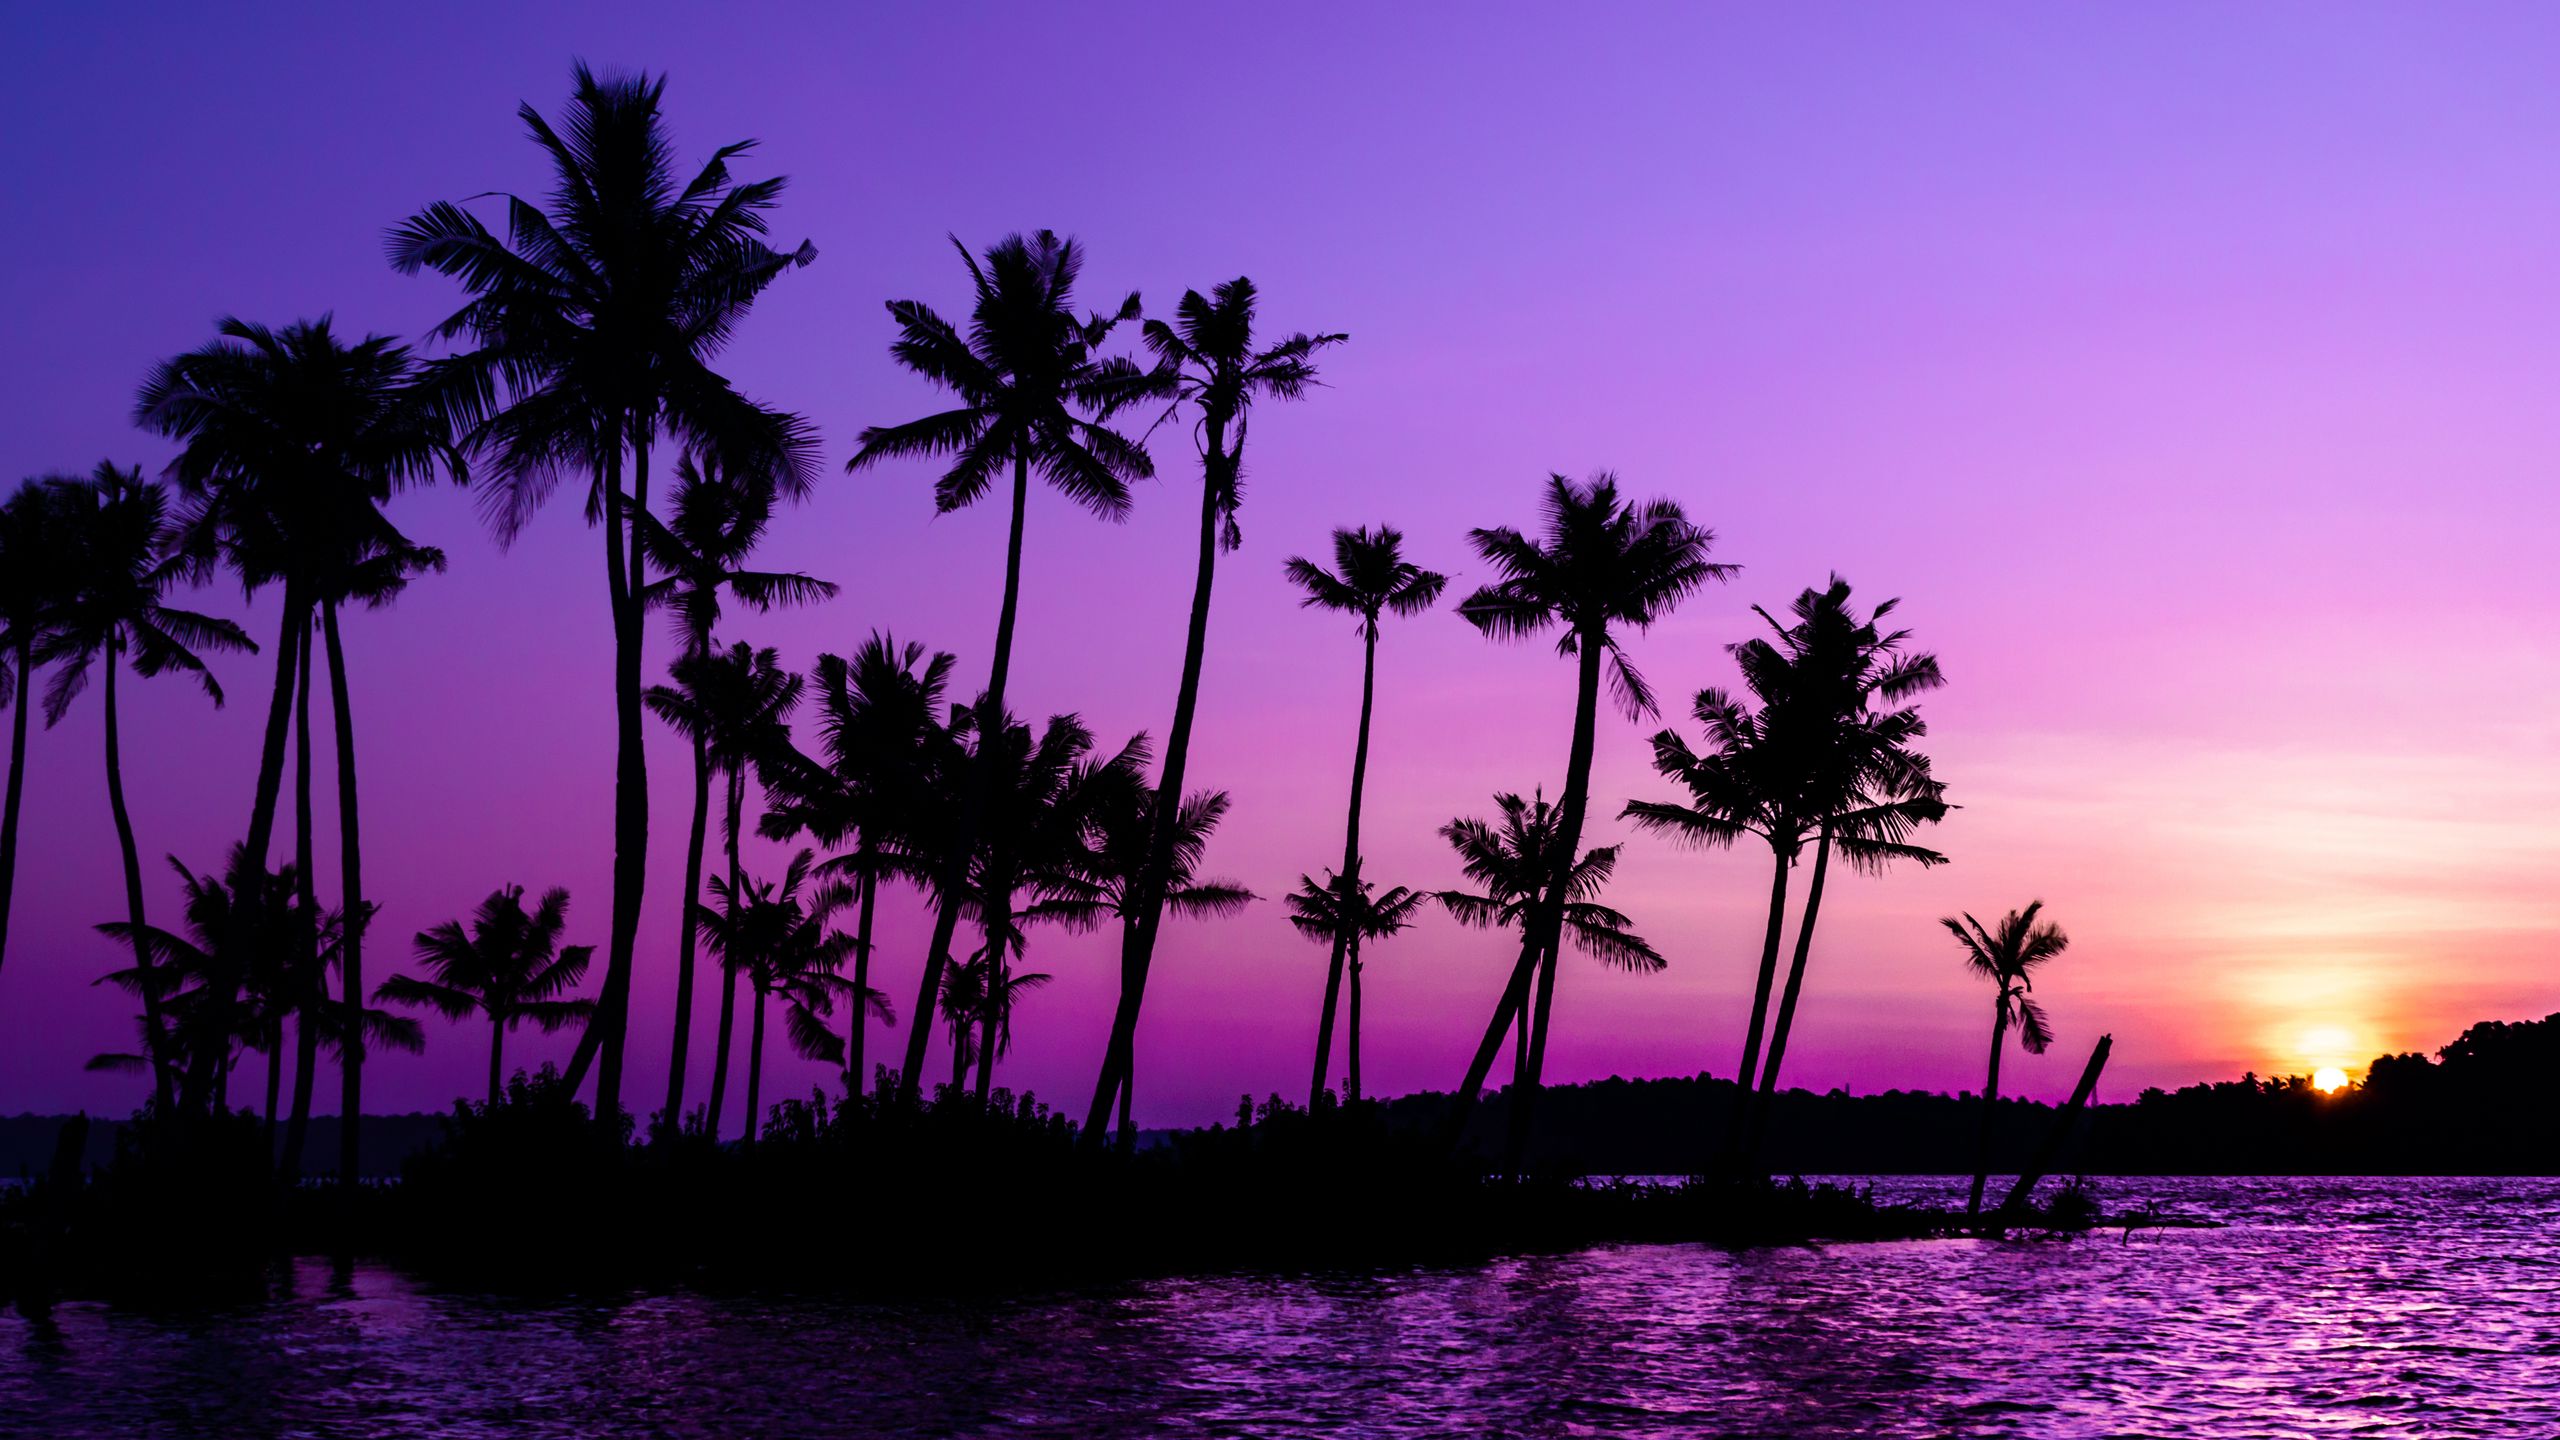 Download Wallpaper 2560x1440 Palm Trees Silhouette Sunset Purple Widescreen 16 9 Hd Background